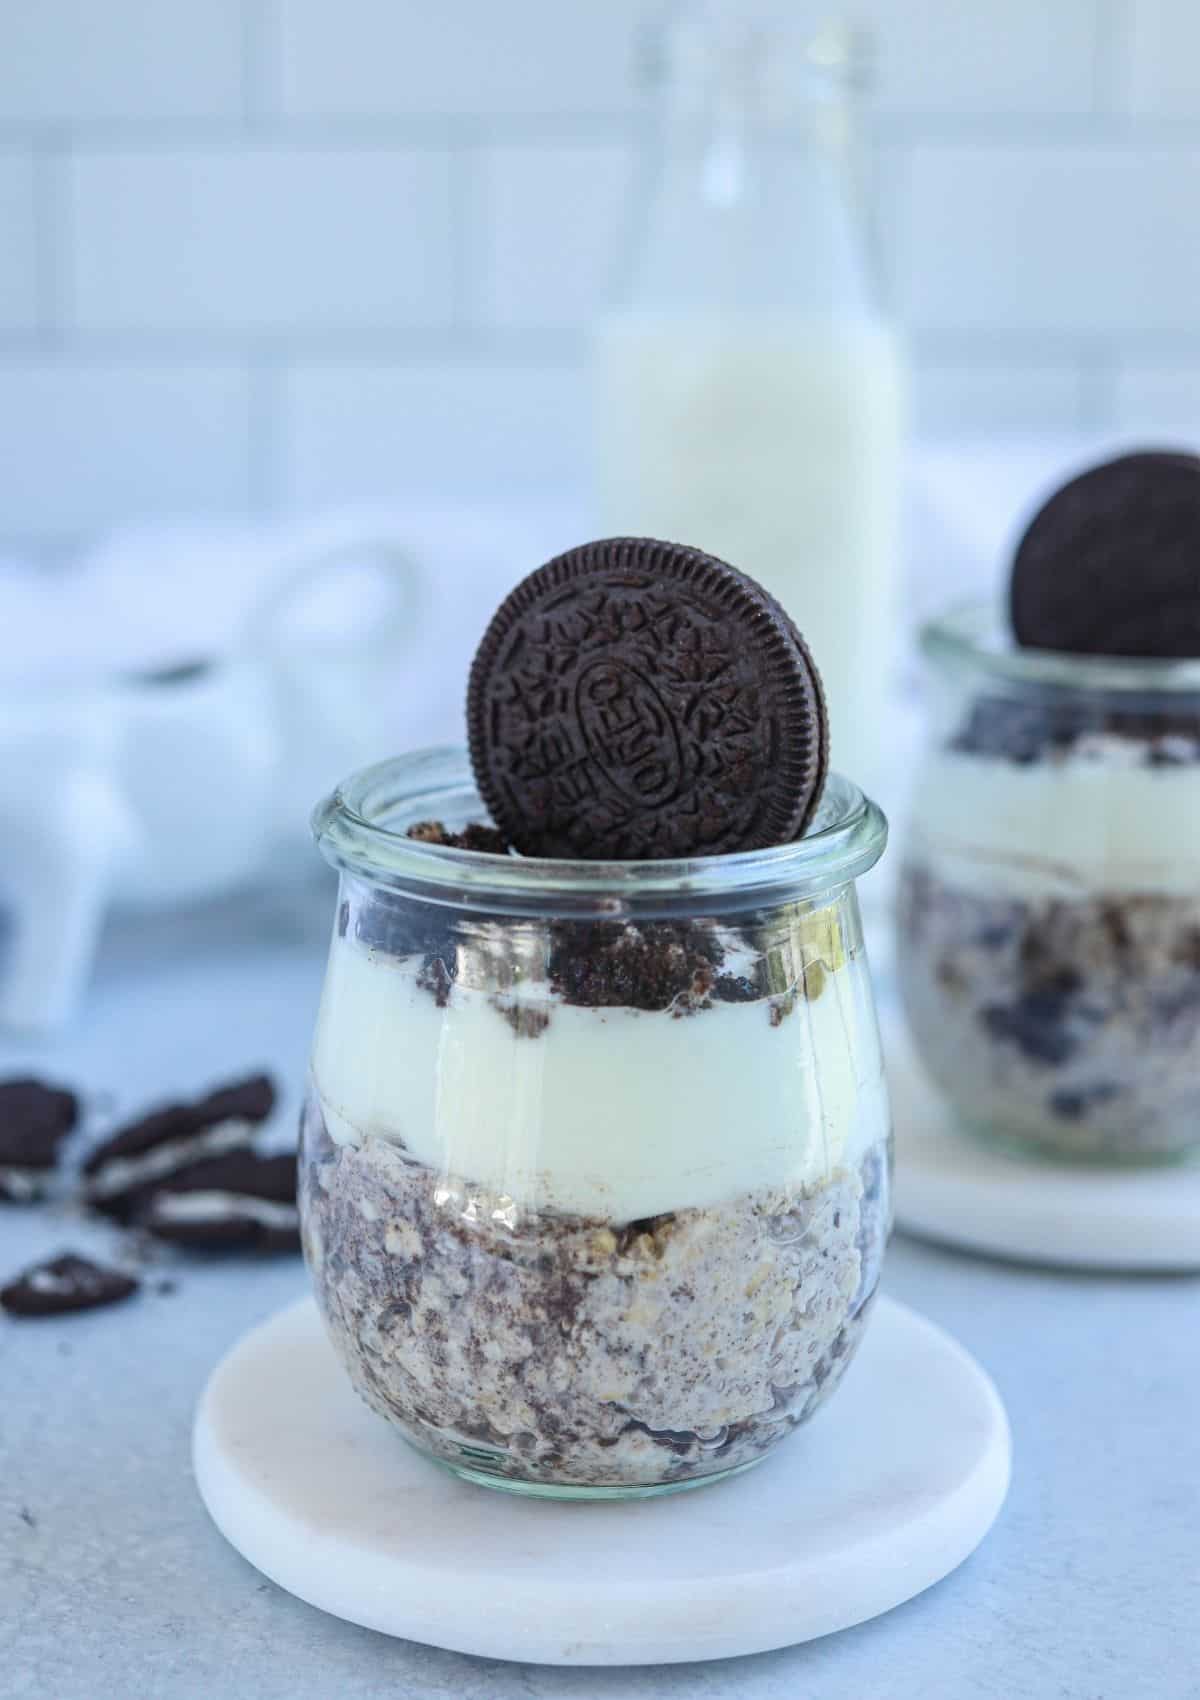 oreo overnight oats topped with yogurt and crushed oreos in a small glass jar decorated with a whole Oreo cookie.